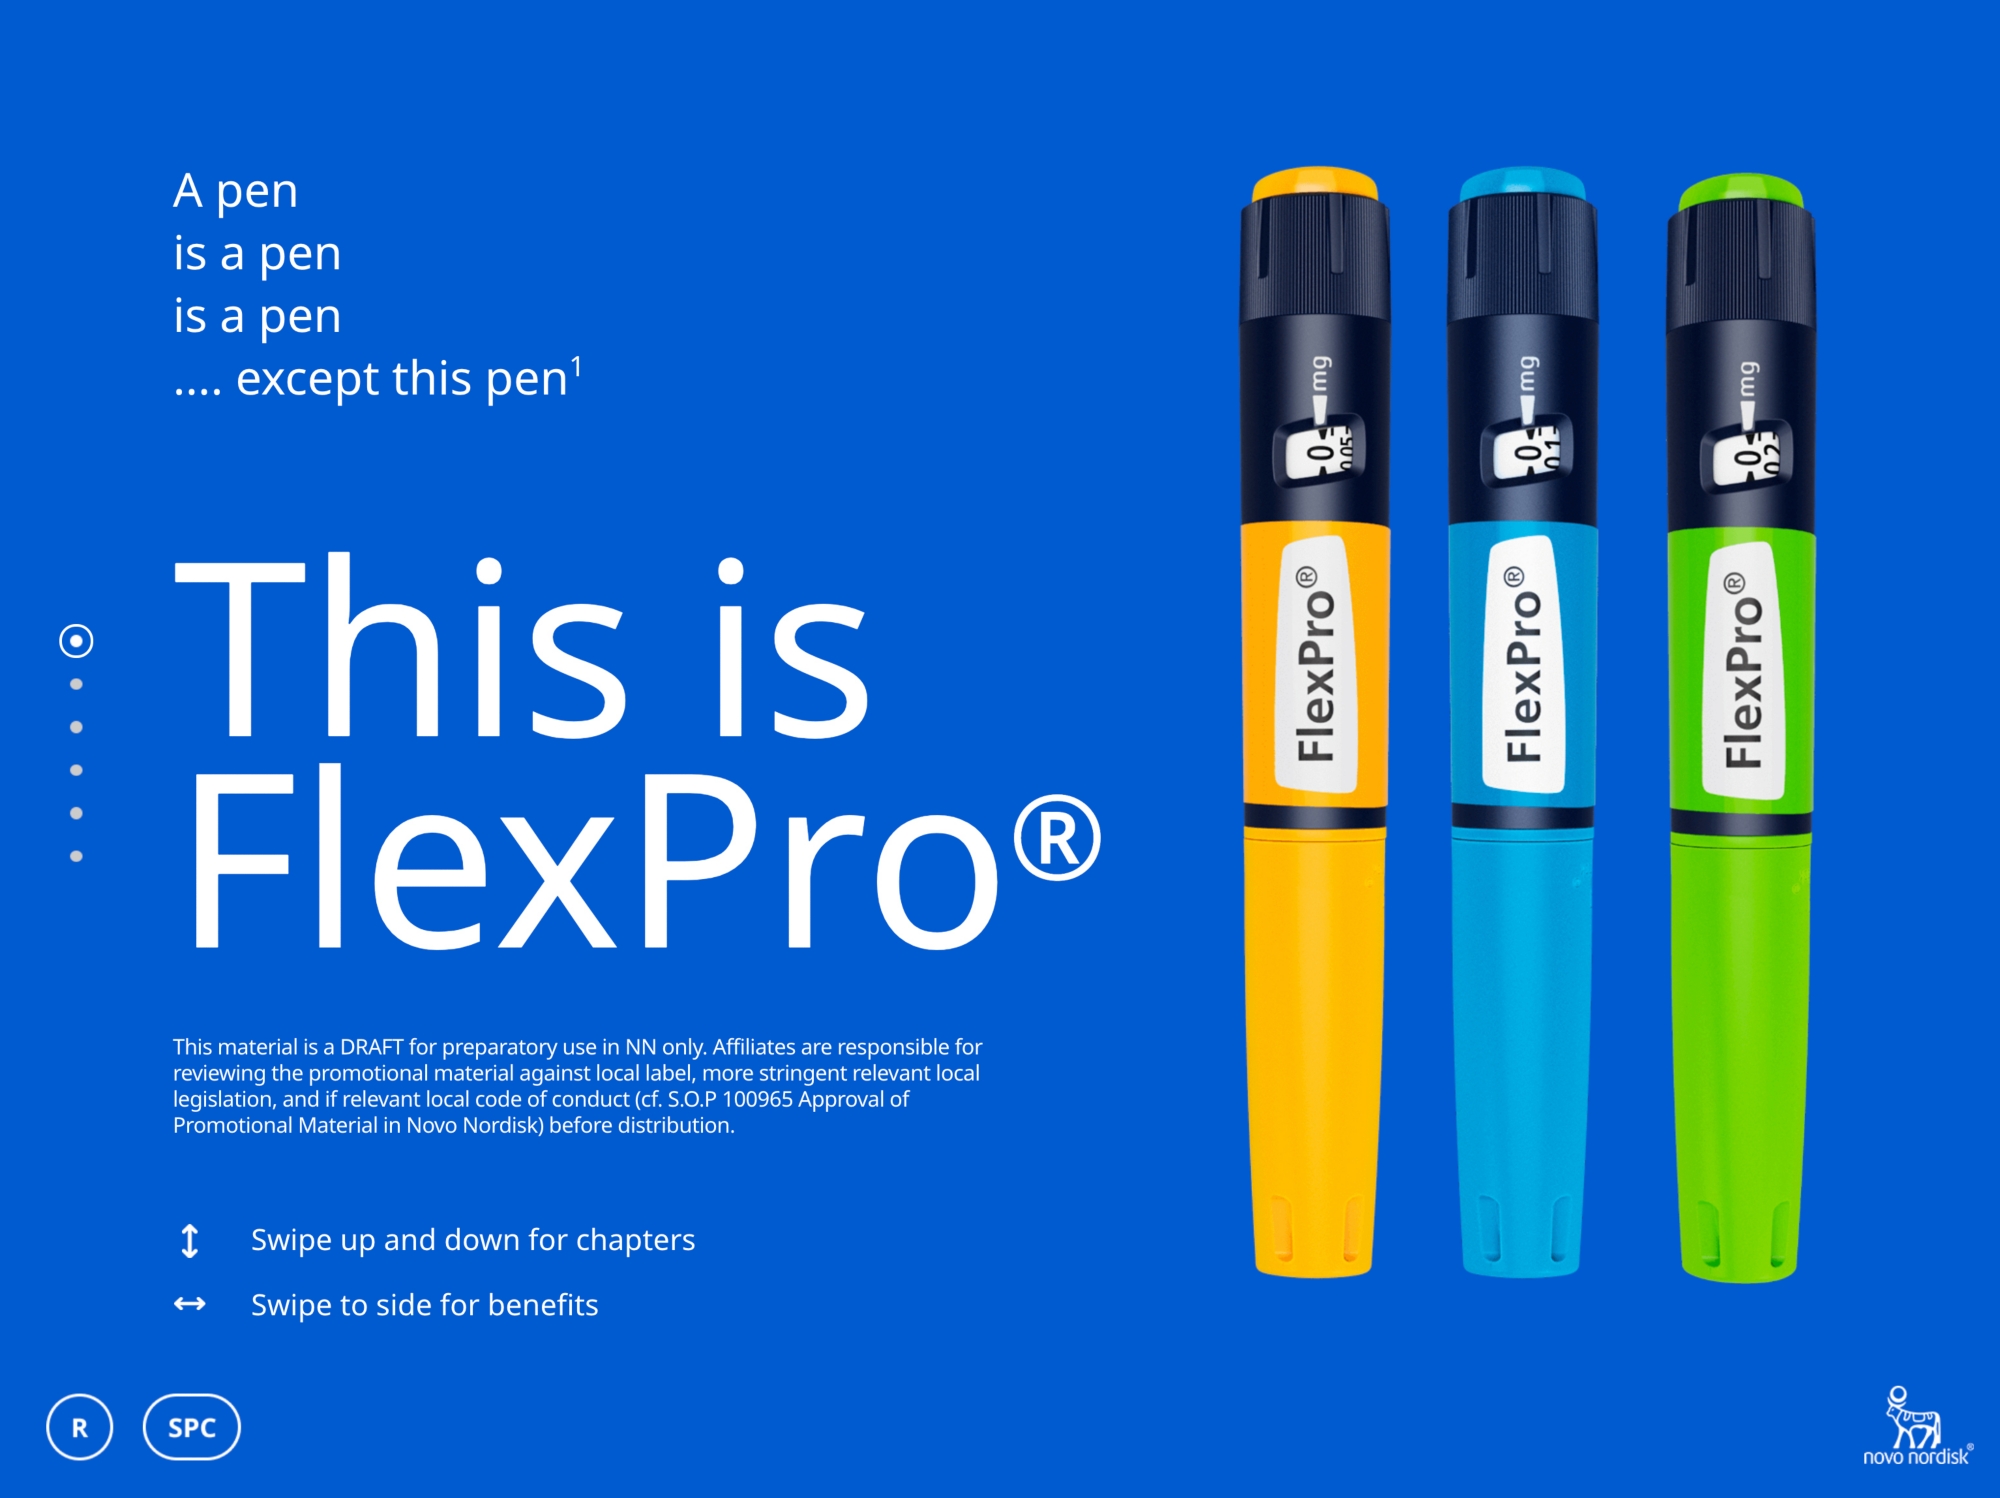 FlexPro devices